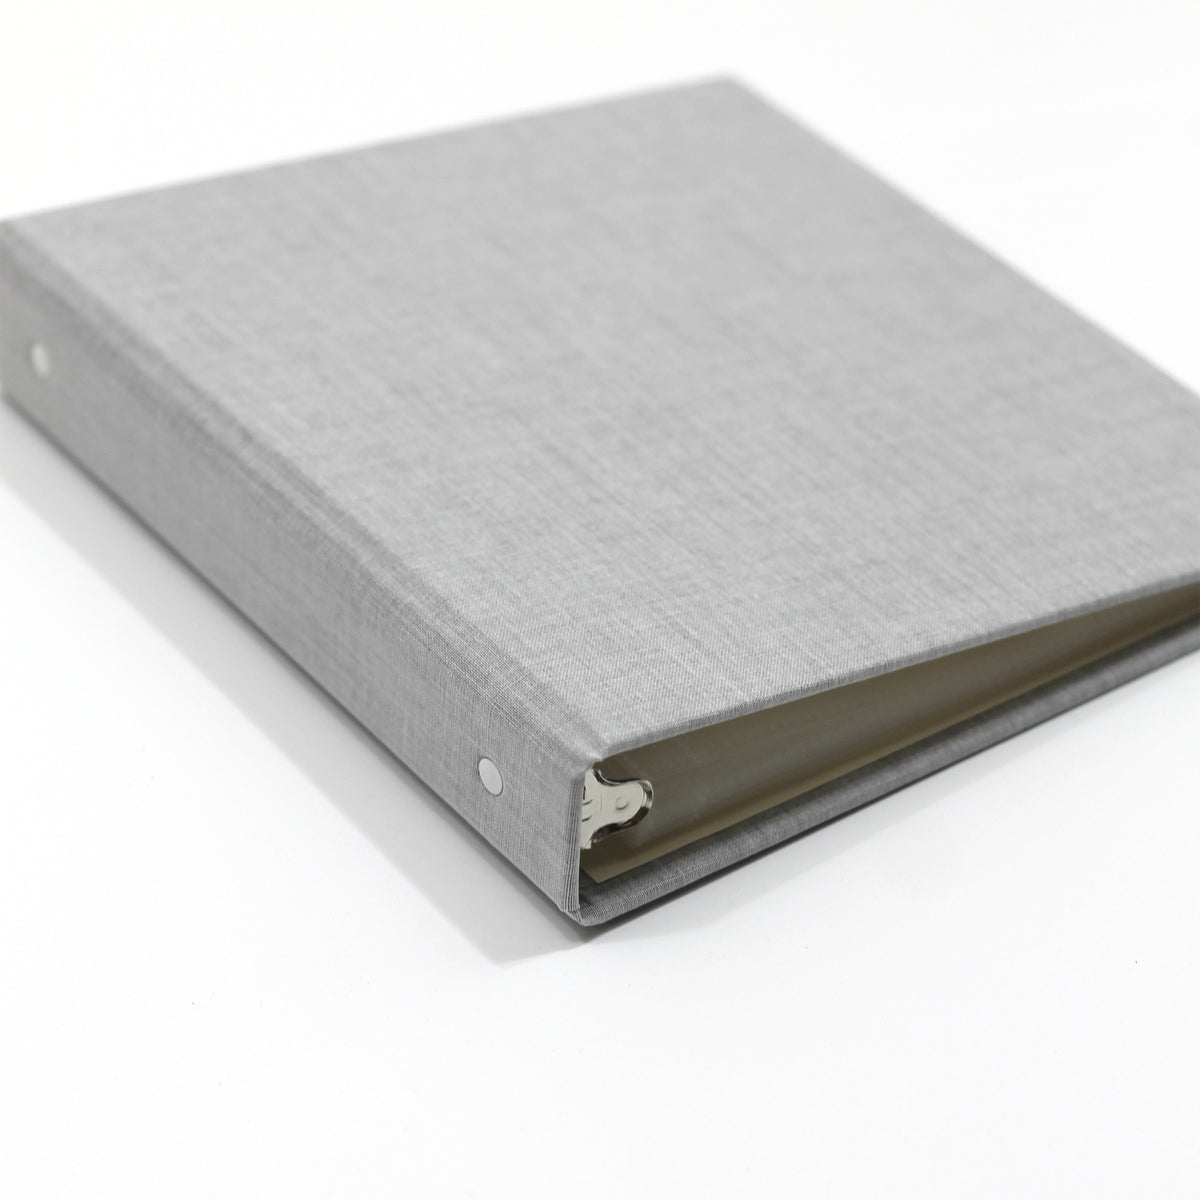 Holiday Card Album | Cover: Dove Gray Cotton | Embossed with “Holiday Cards” | Available Personalized